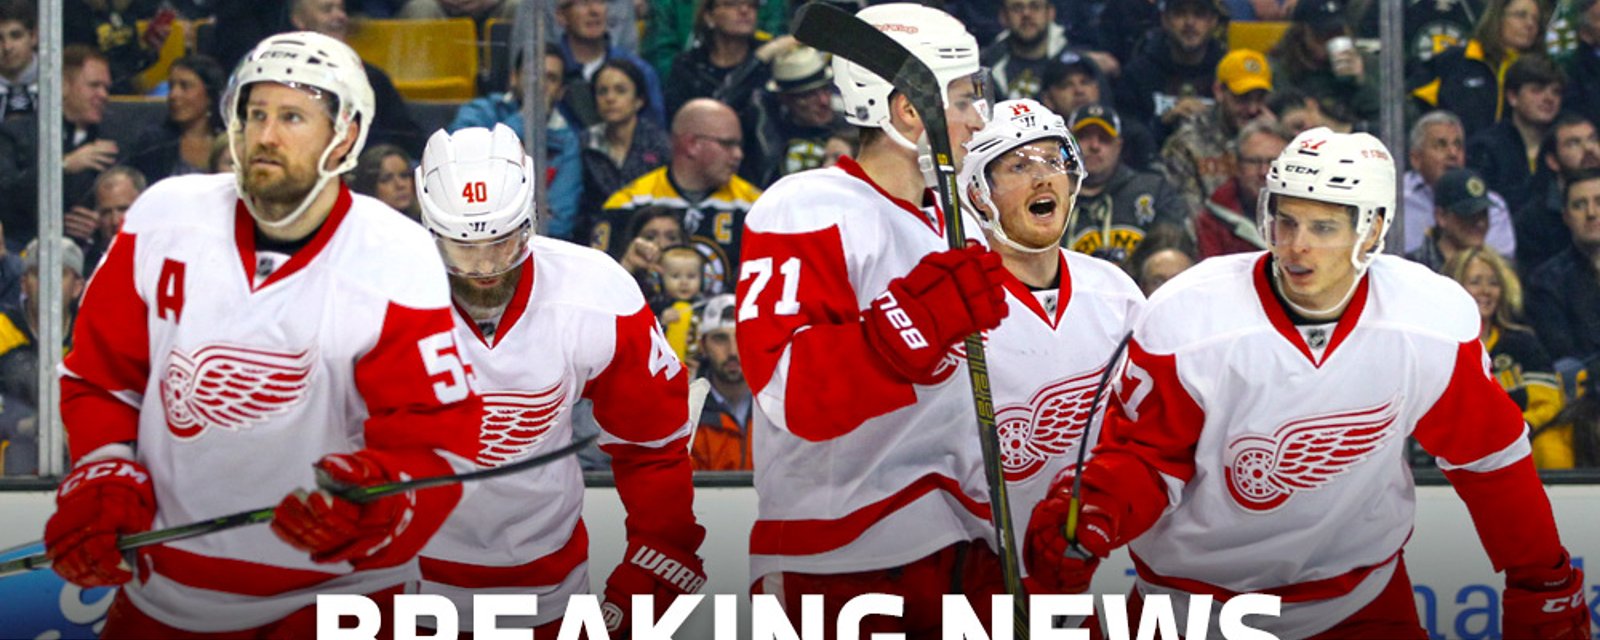 BREAKING: Red Wings Make Roster Cut